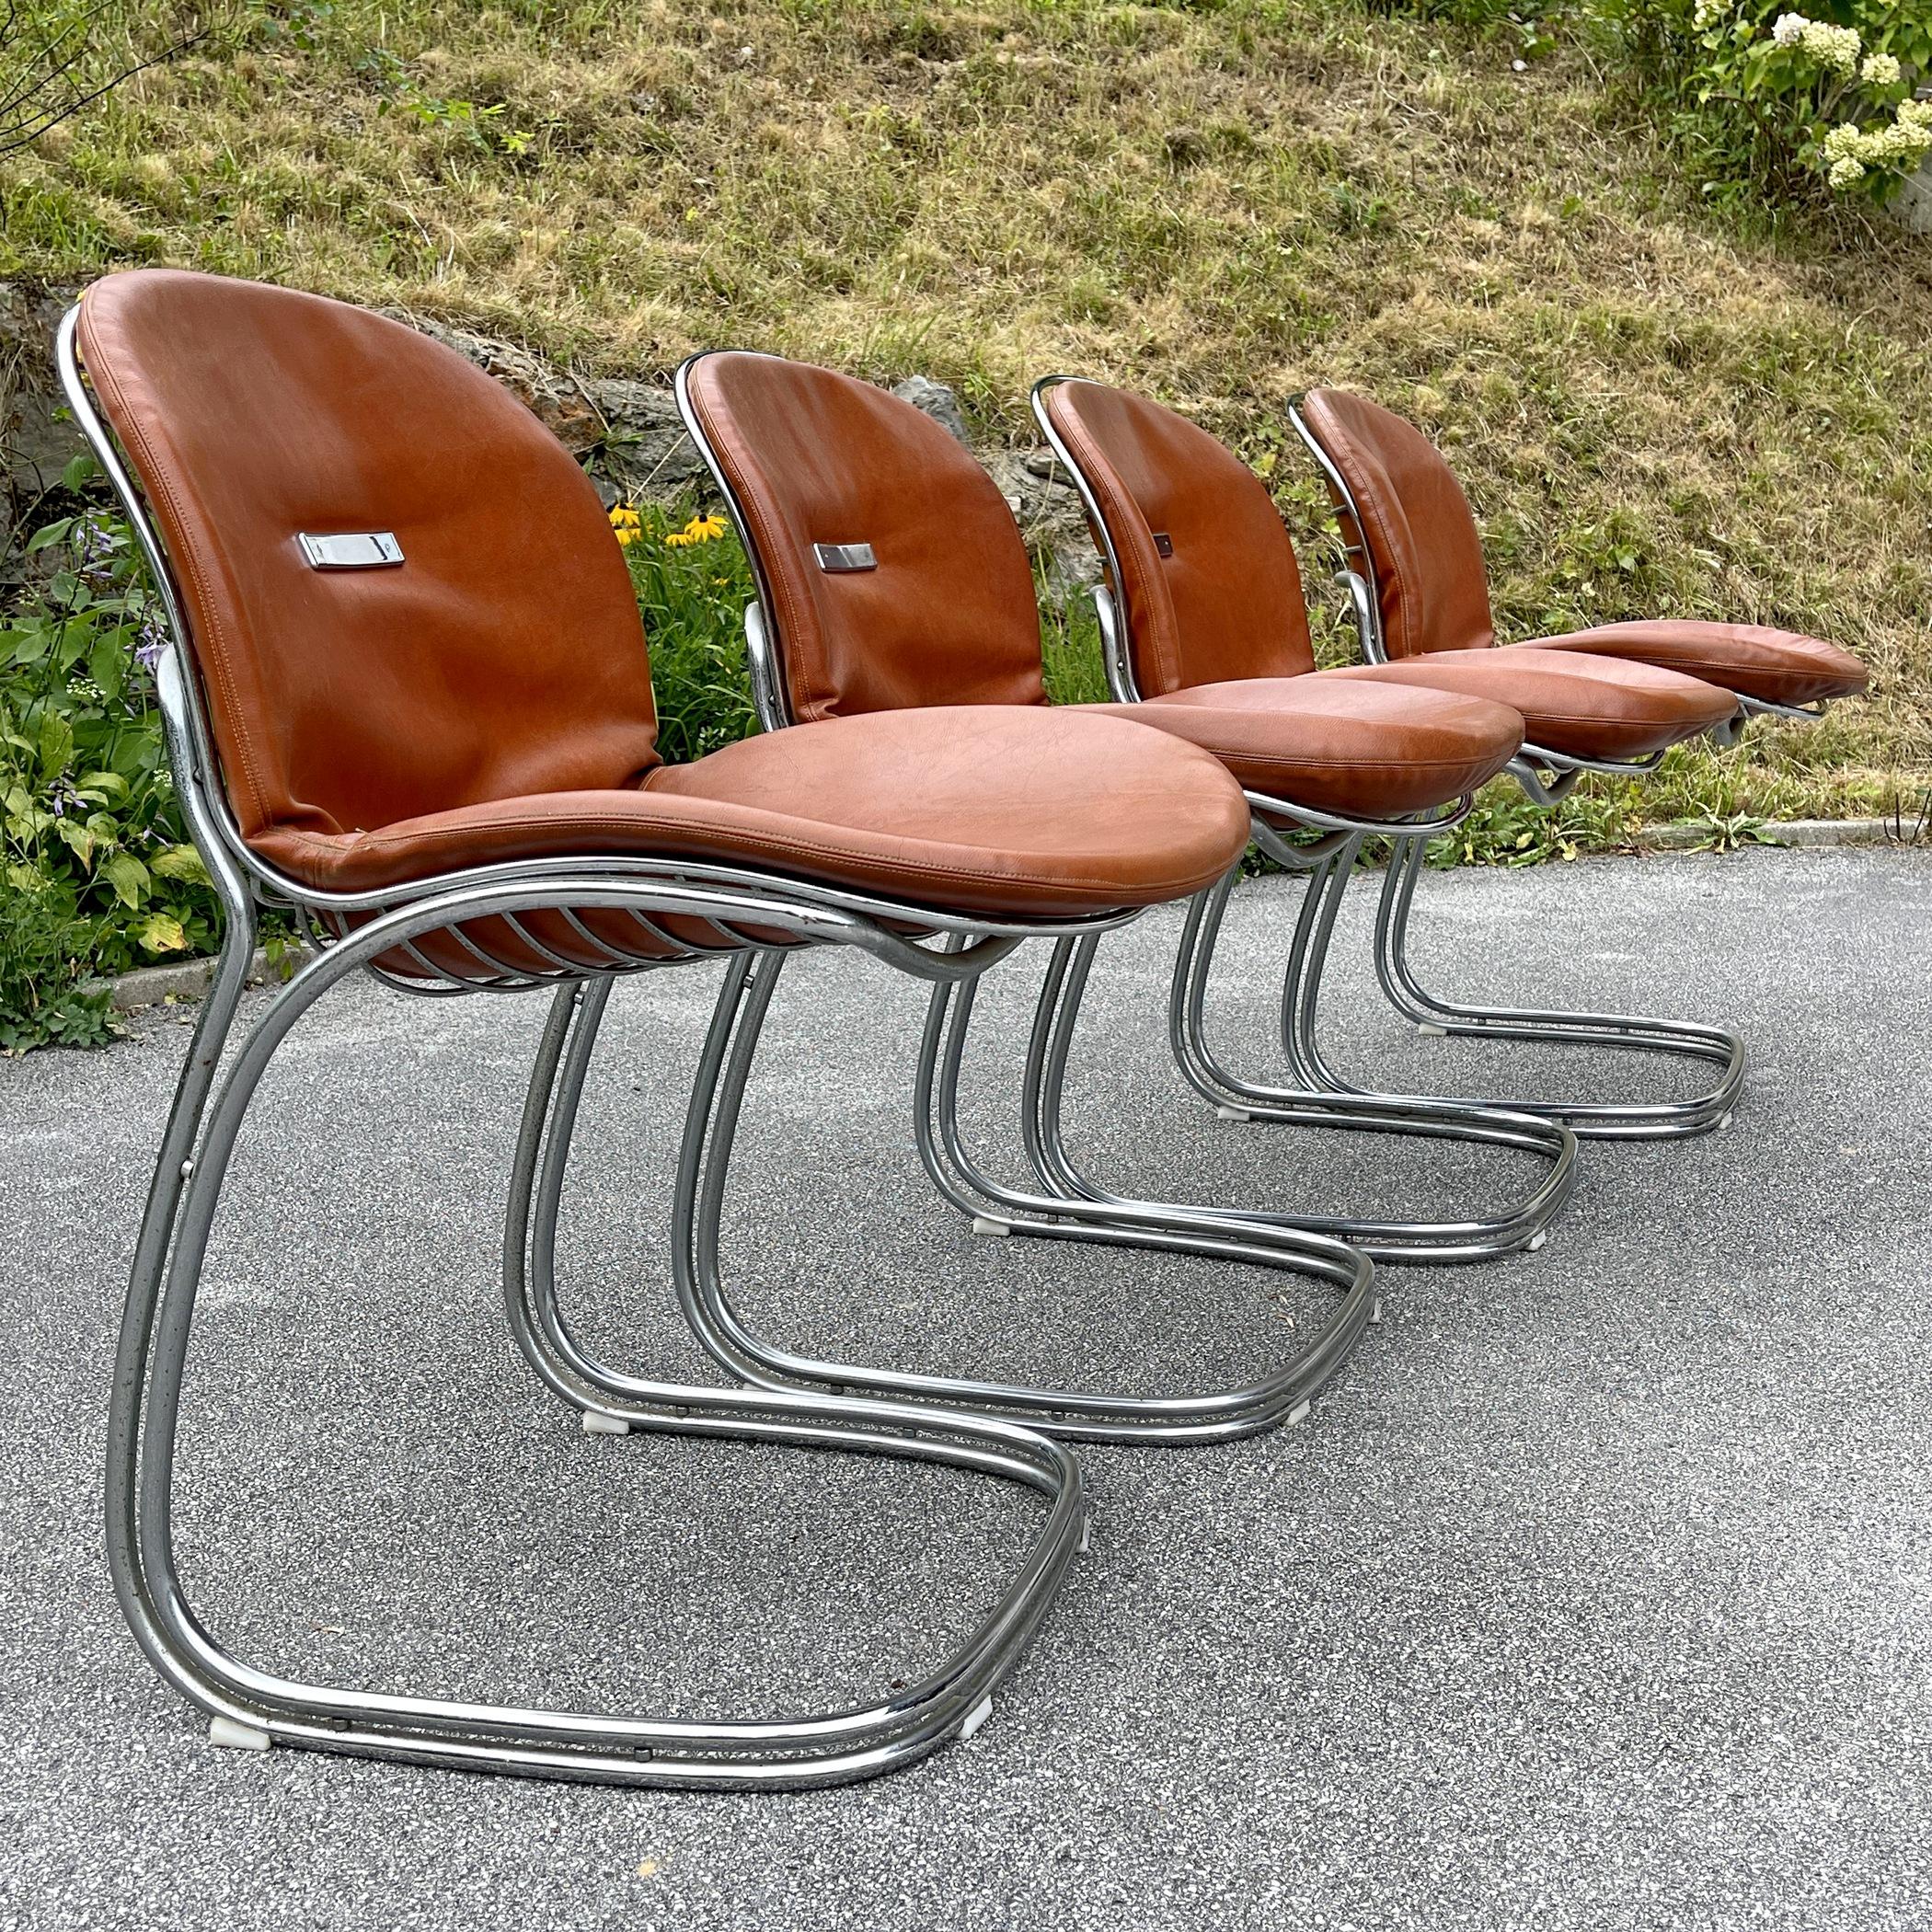 The set of 4 dining chairs Sabrina was designed by Italian designer Gastone Rinaldi for Rima (Padova, Italy) in the 1970s. Although Rinaldi is not as widely known as many of his contemporaries, Rinaldi’s designs—many of which were produced in